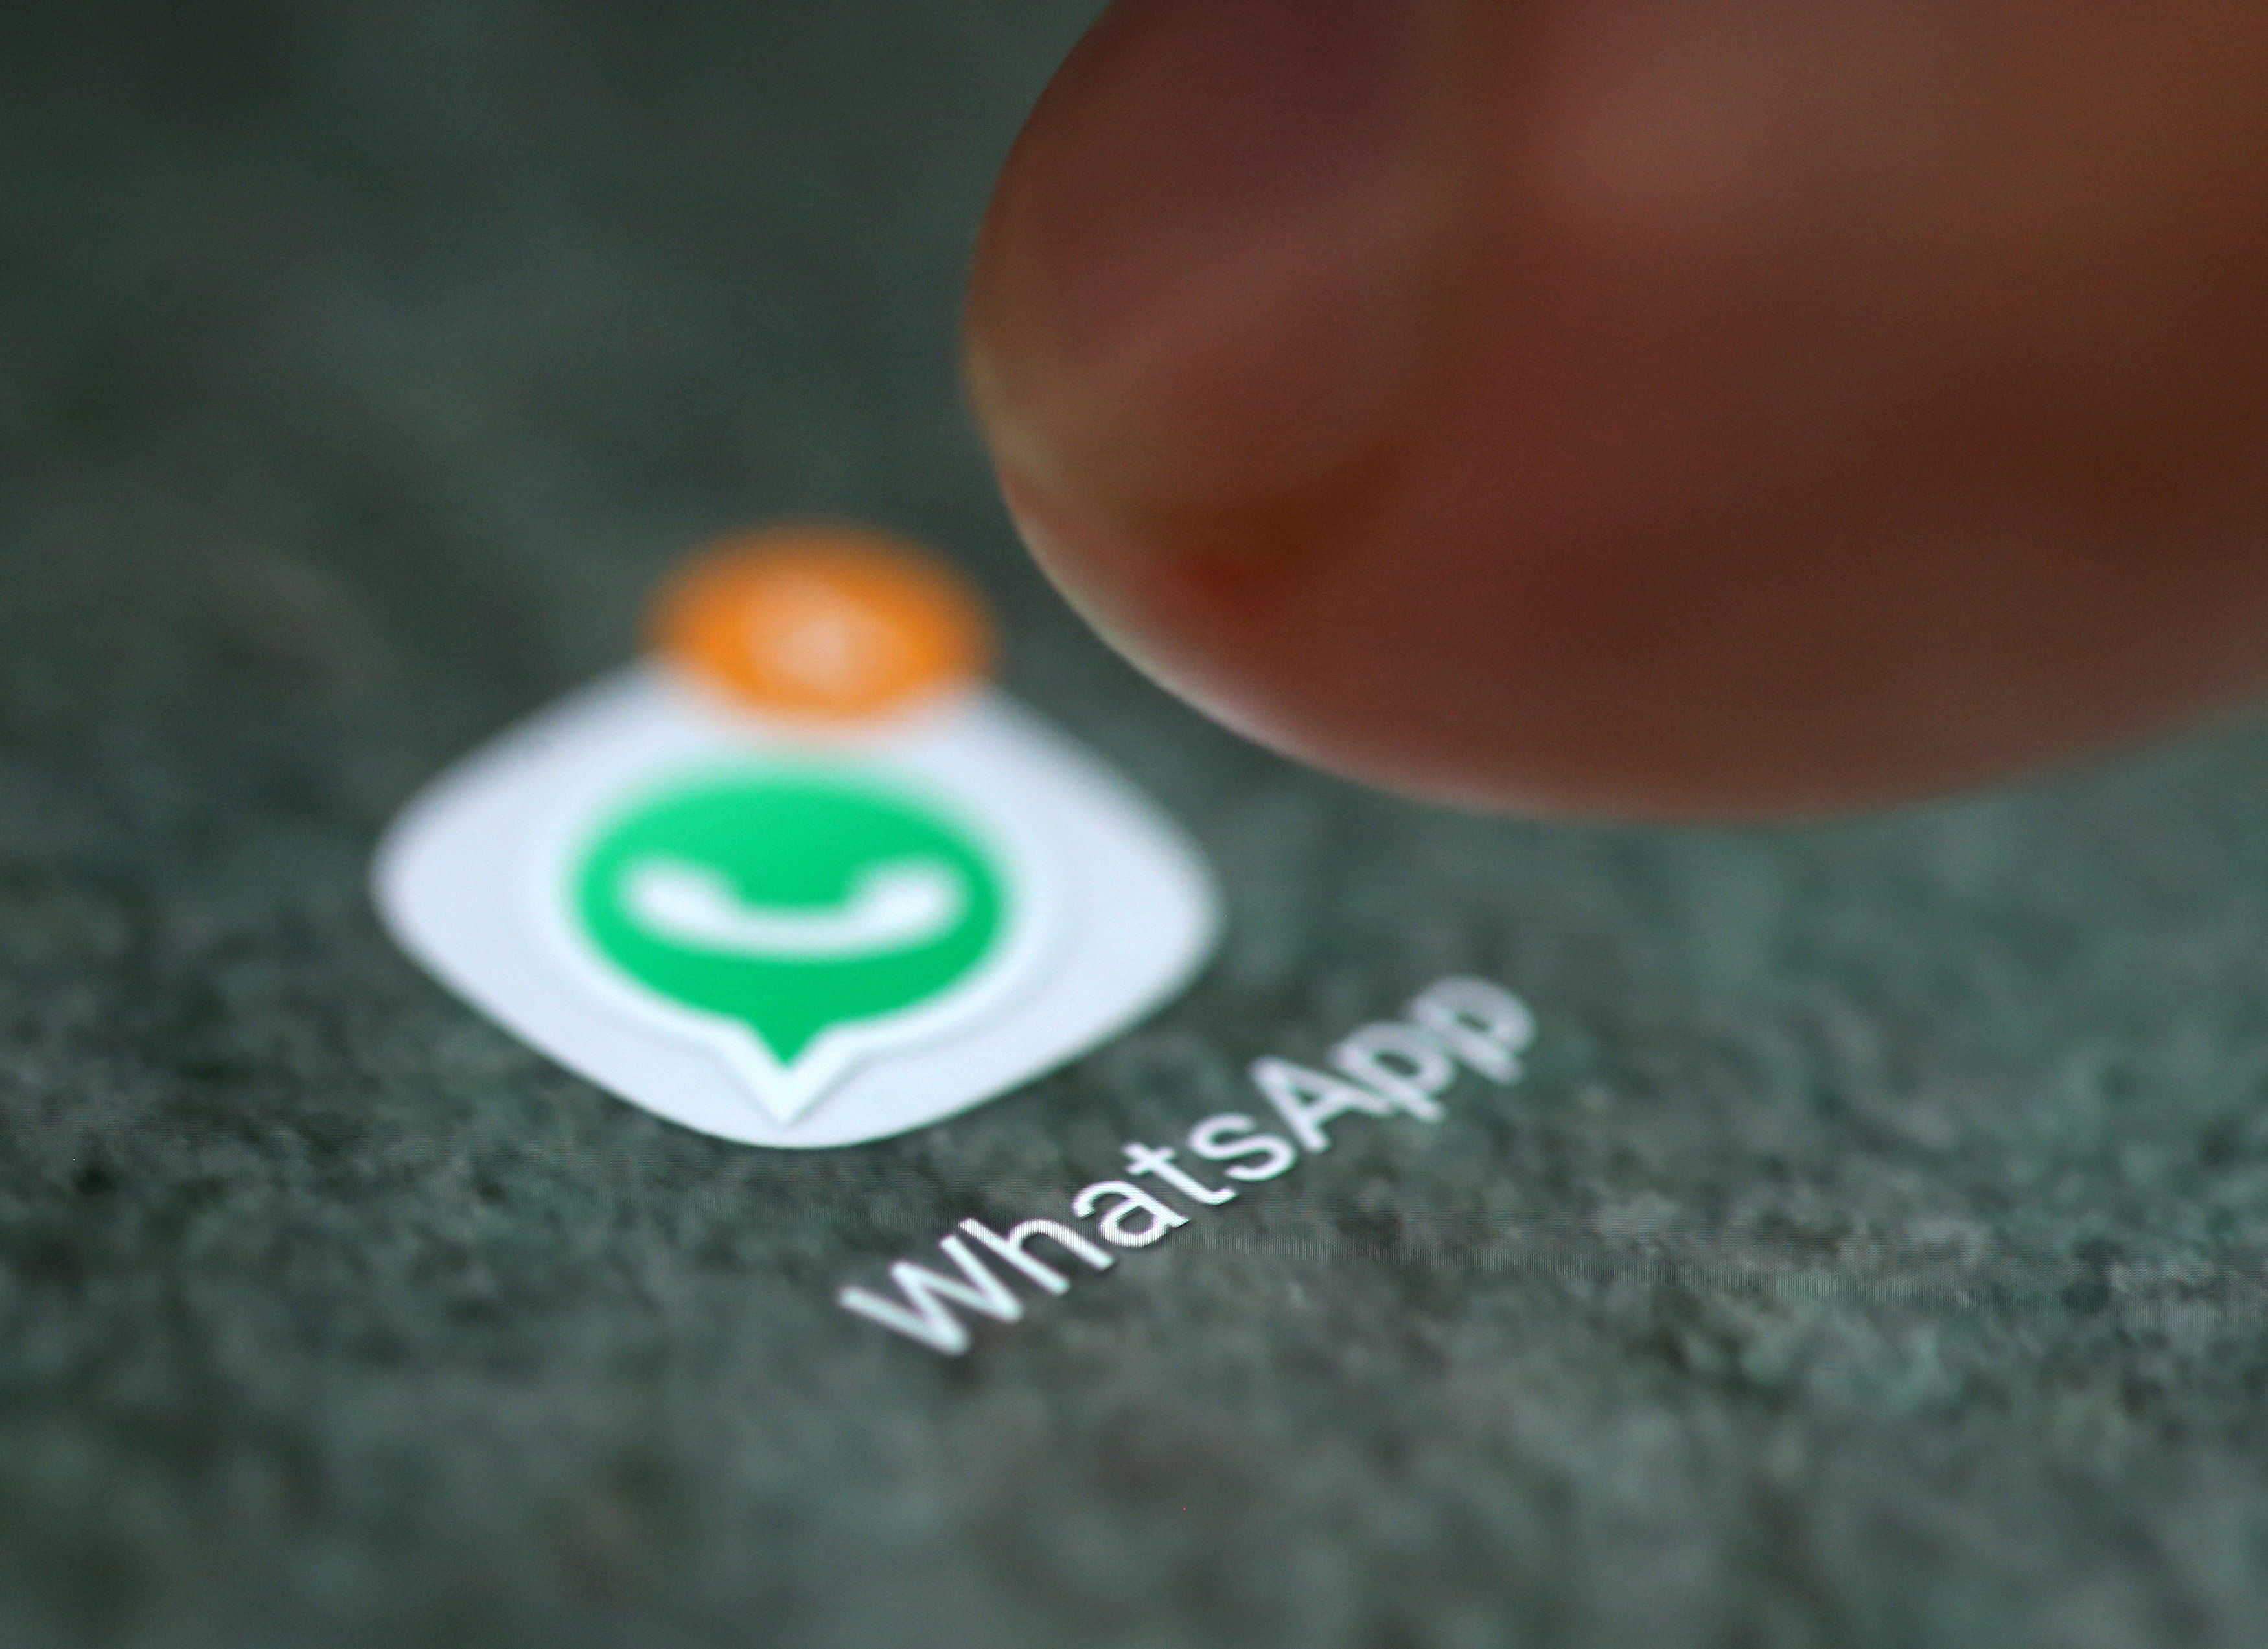 WhatsApp app on the iPhone. Credit: Reuters